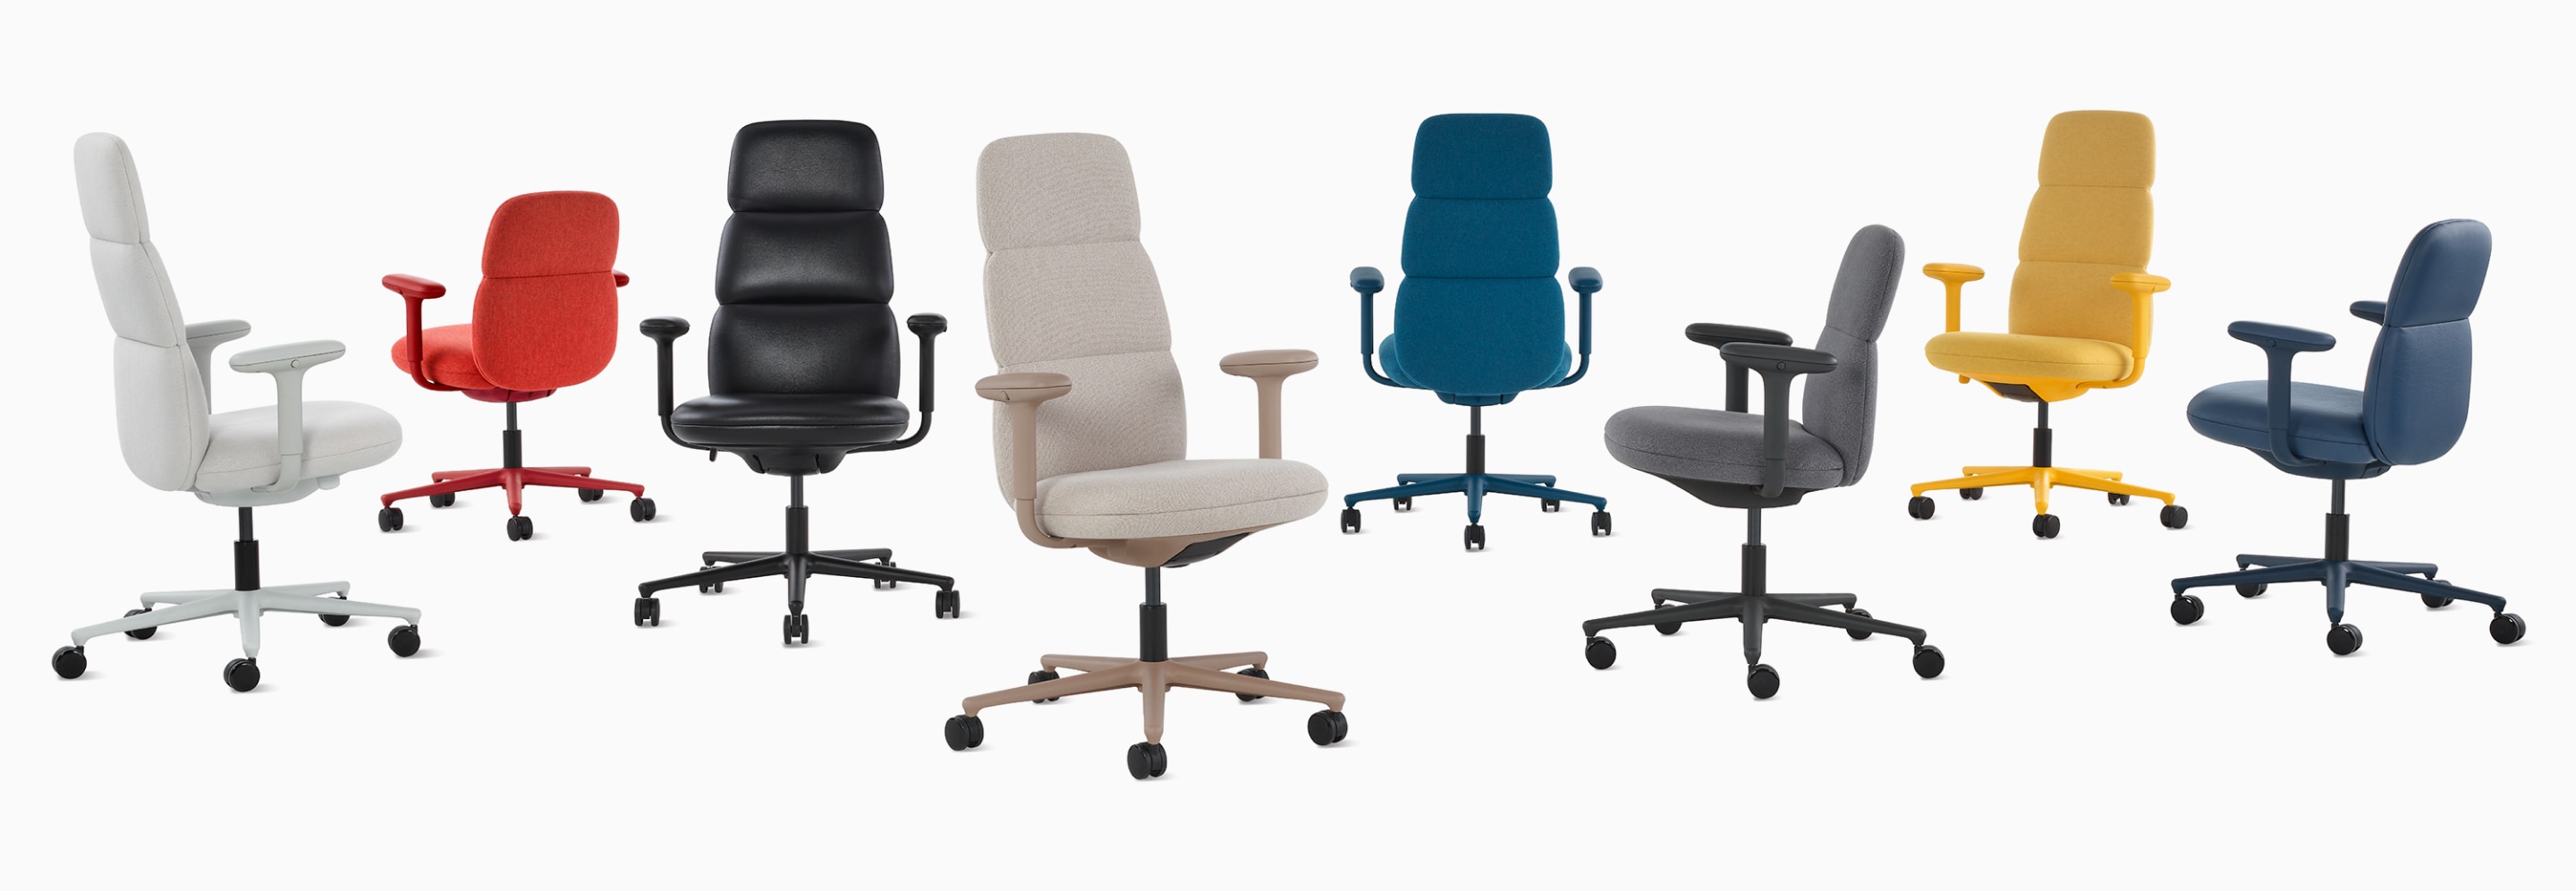 A group of eight Asari chairs by Herman Miller with height adjustable arms in all available color flood options. There are five high-back chairs and three mid-back chairs.